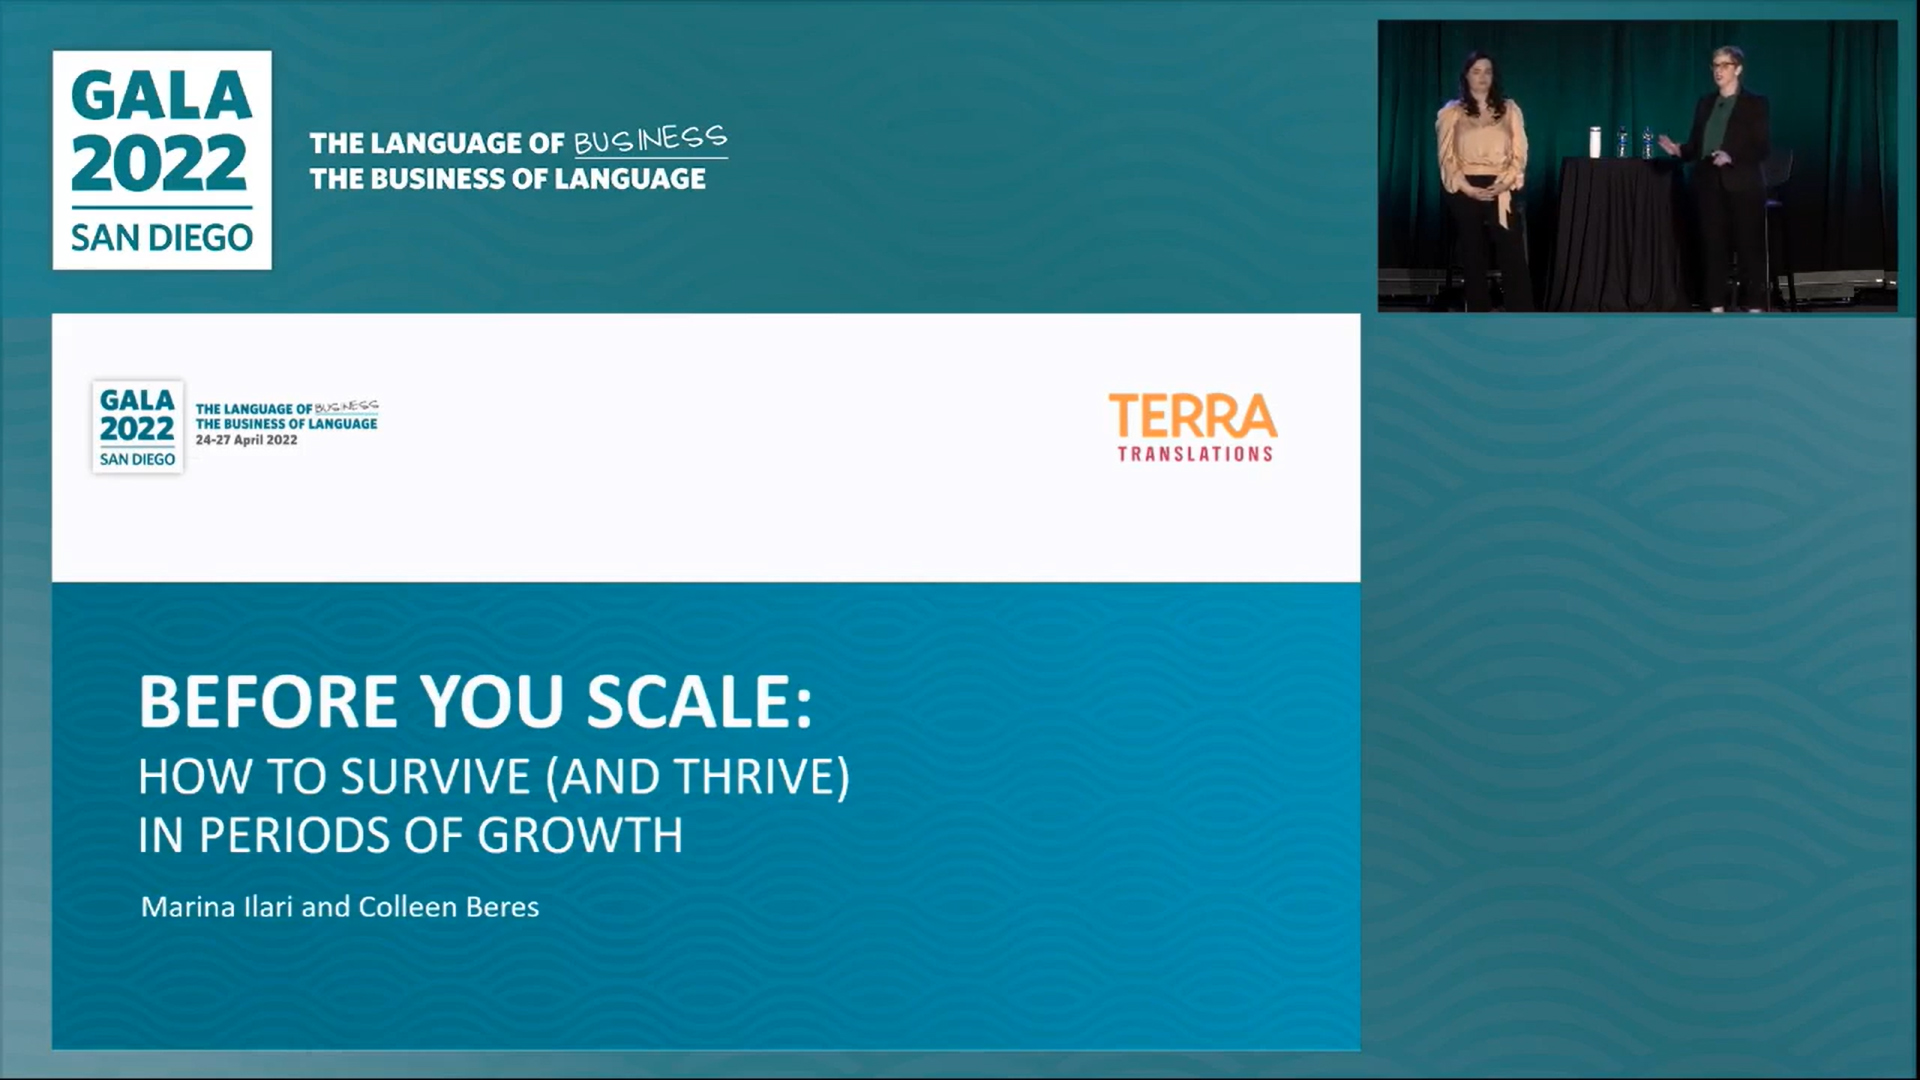 Before You Scale: How to Survive (and Thrive) in Periods of Growth